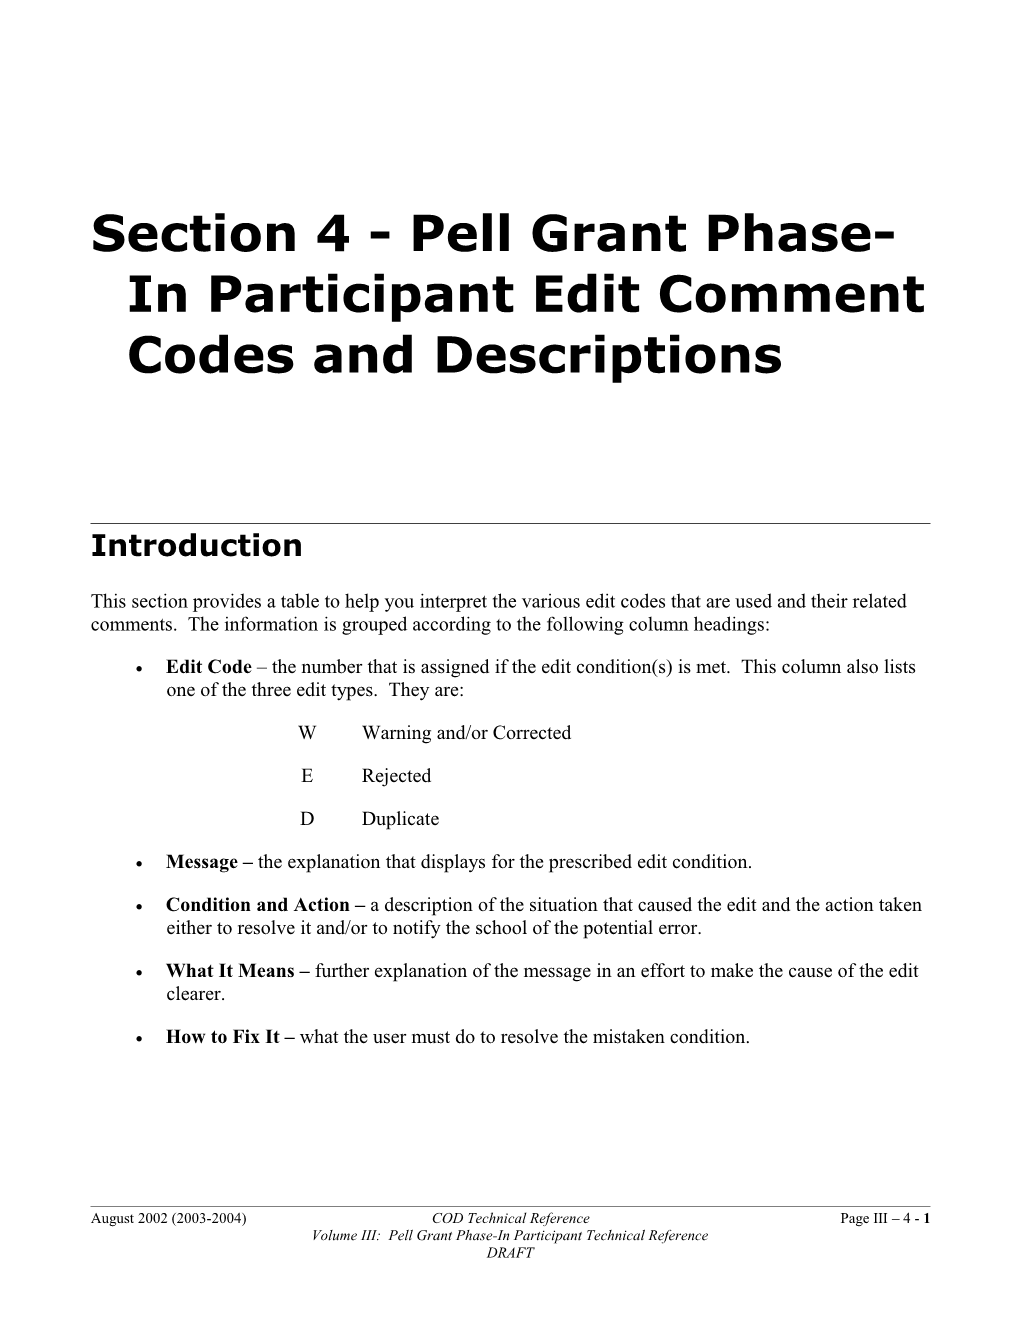 Section 4 - Pell Grant Phase-In Participant Edit Comment Codes and Descriptions